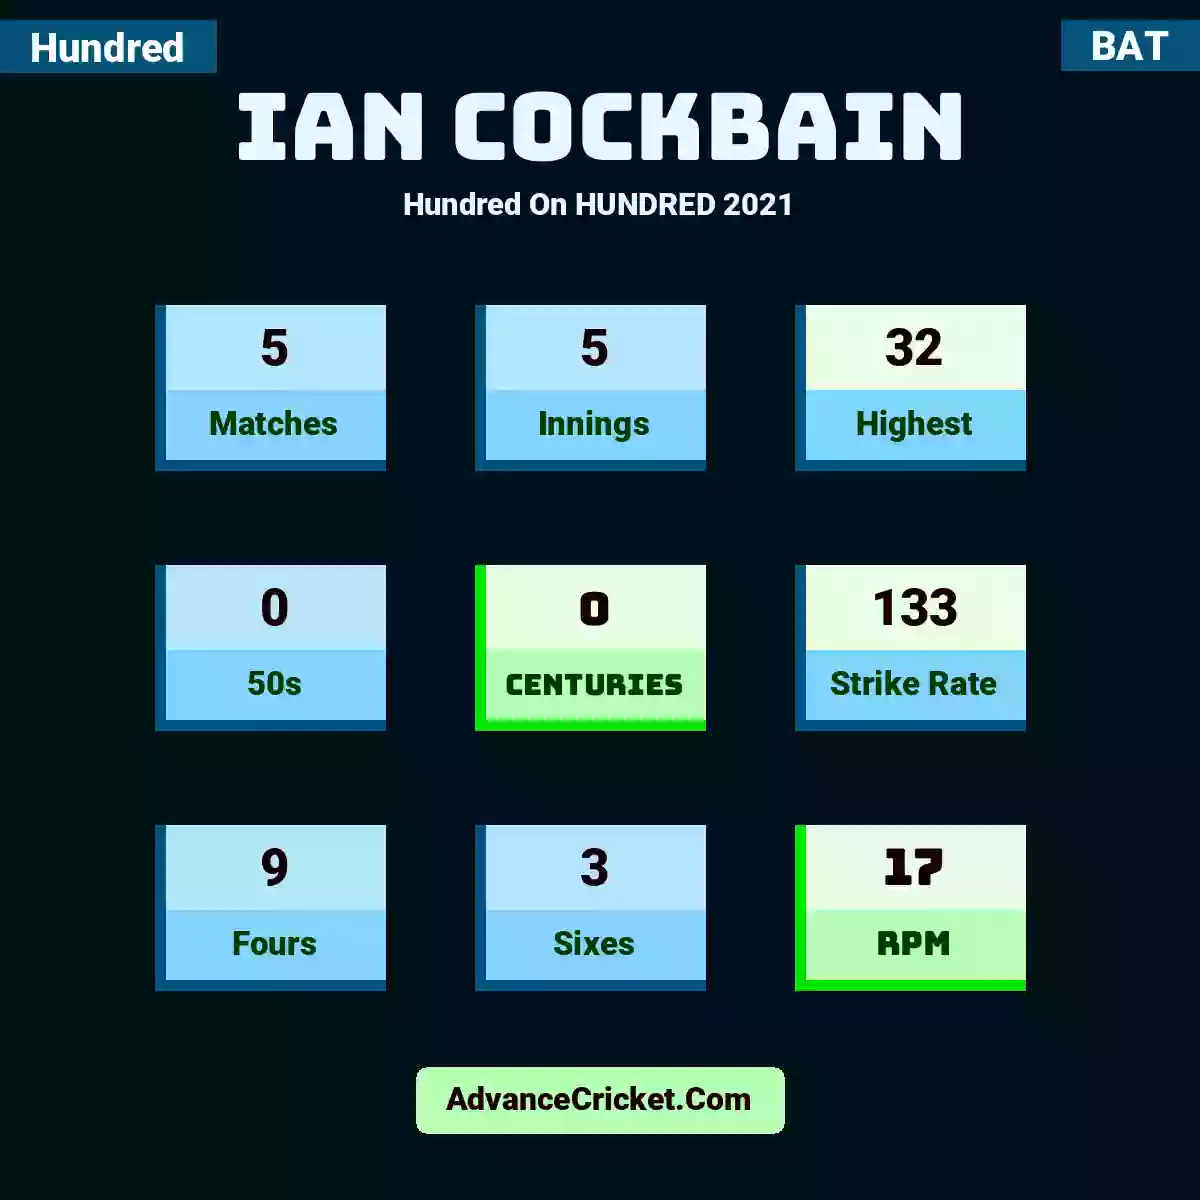 Ian Cockbain Hundred  On HUNDRED 2021, Ian Cockbain played 5 matches, scored 32 runs as highest, 0 half-centuries, and 0 centuries, with a strike rate of 133. I.Cockbain hit 9 fours and 3 sixes, with an RPM of 17.